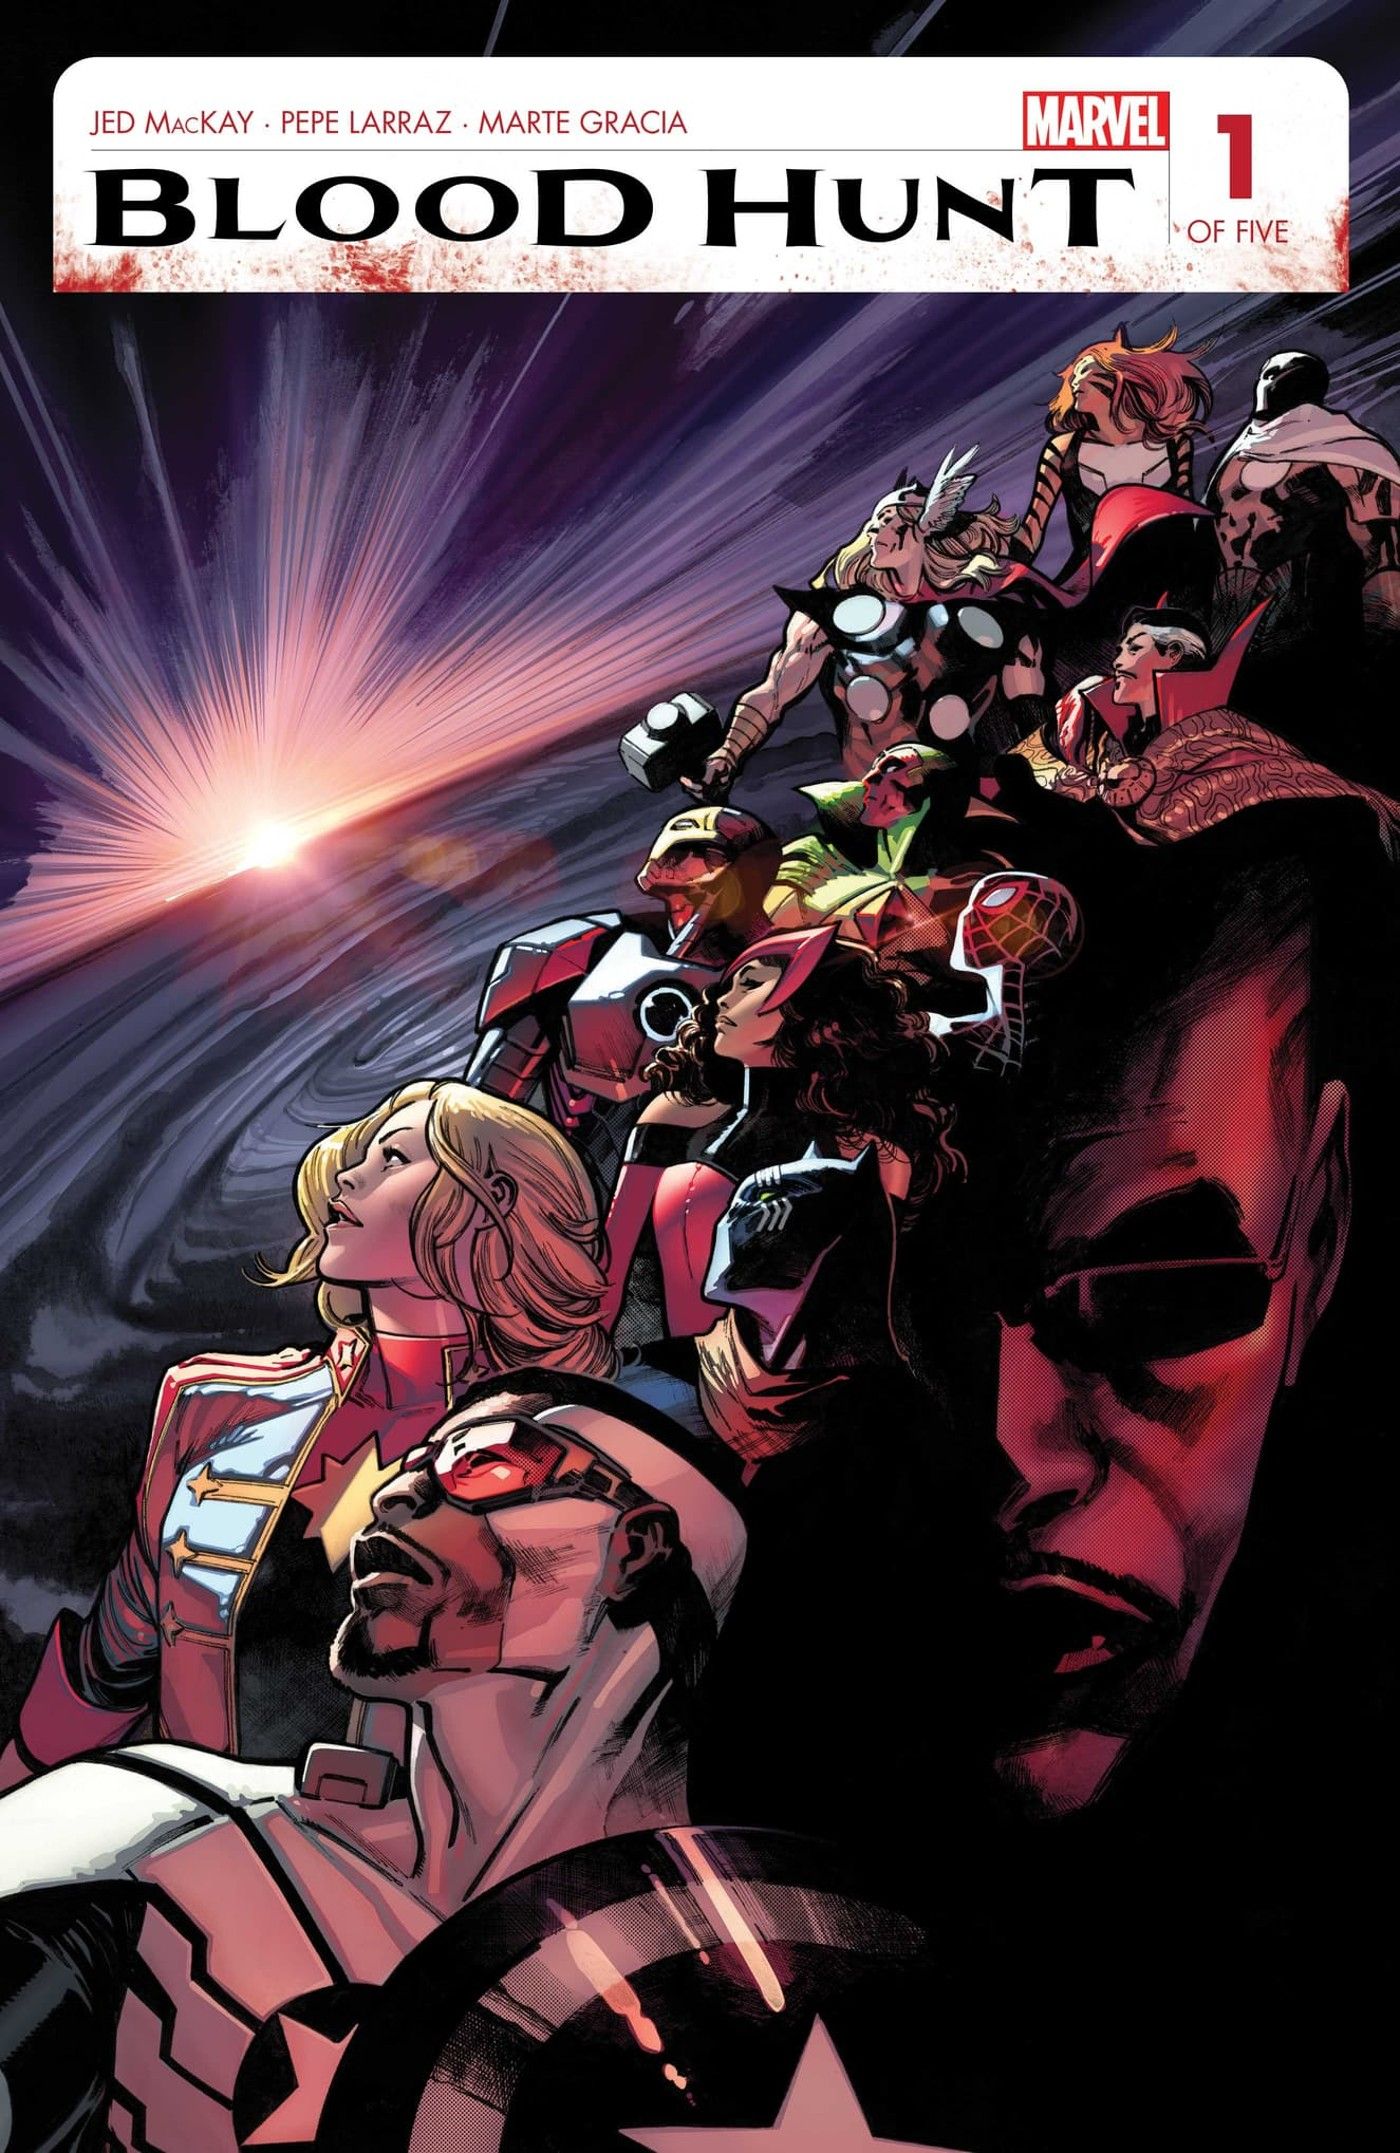 Blood Hunt #1 cover, featuring the Avengers and Blade as the sun sets on the Earth.